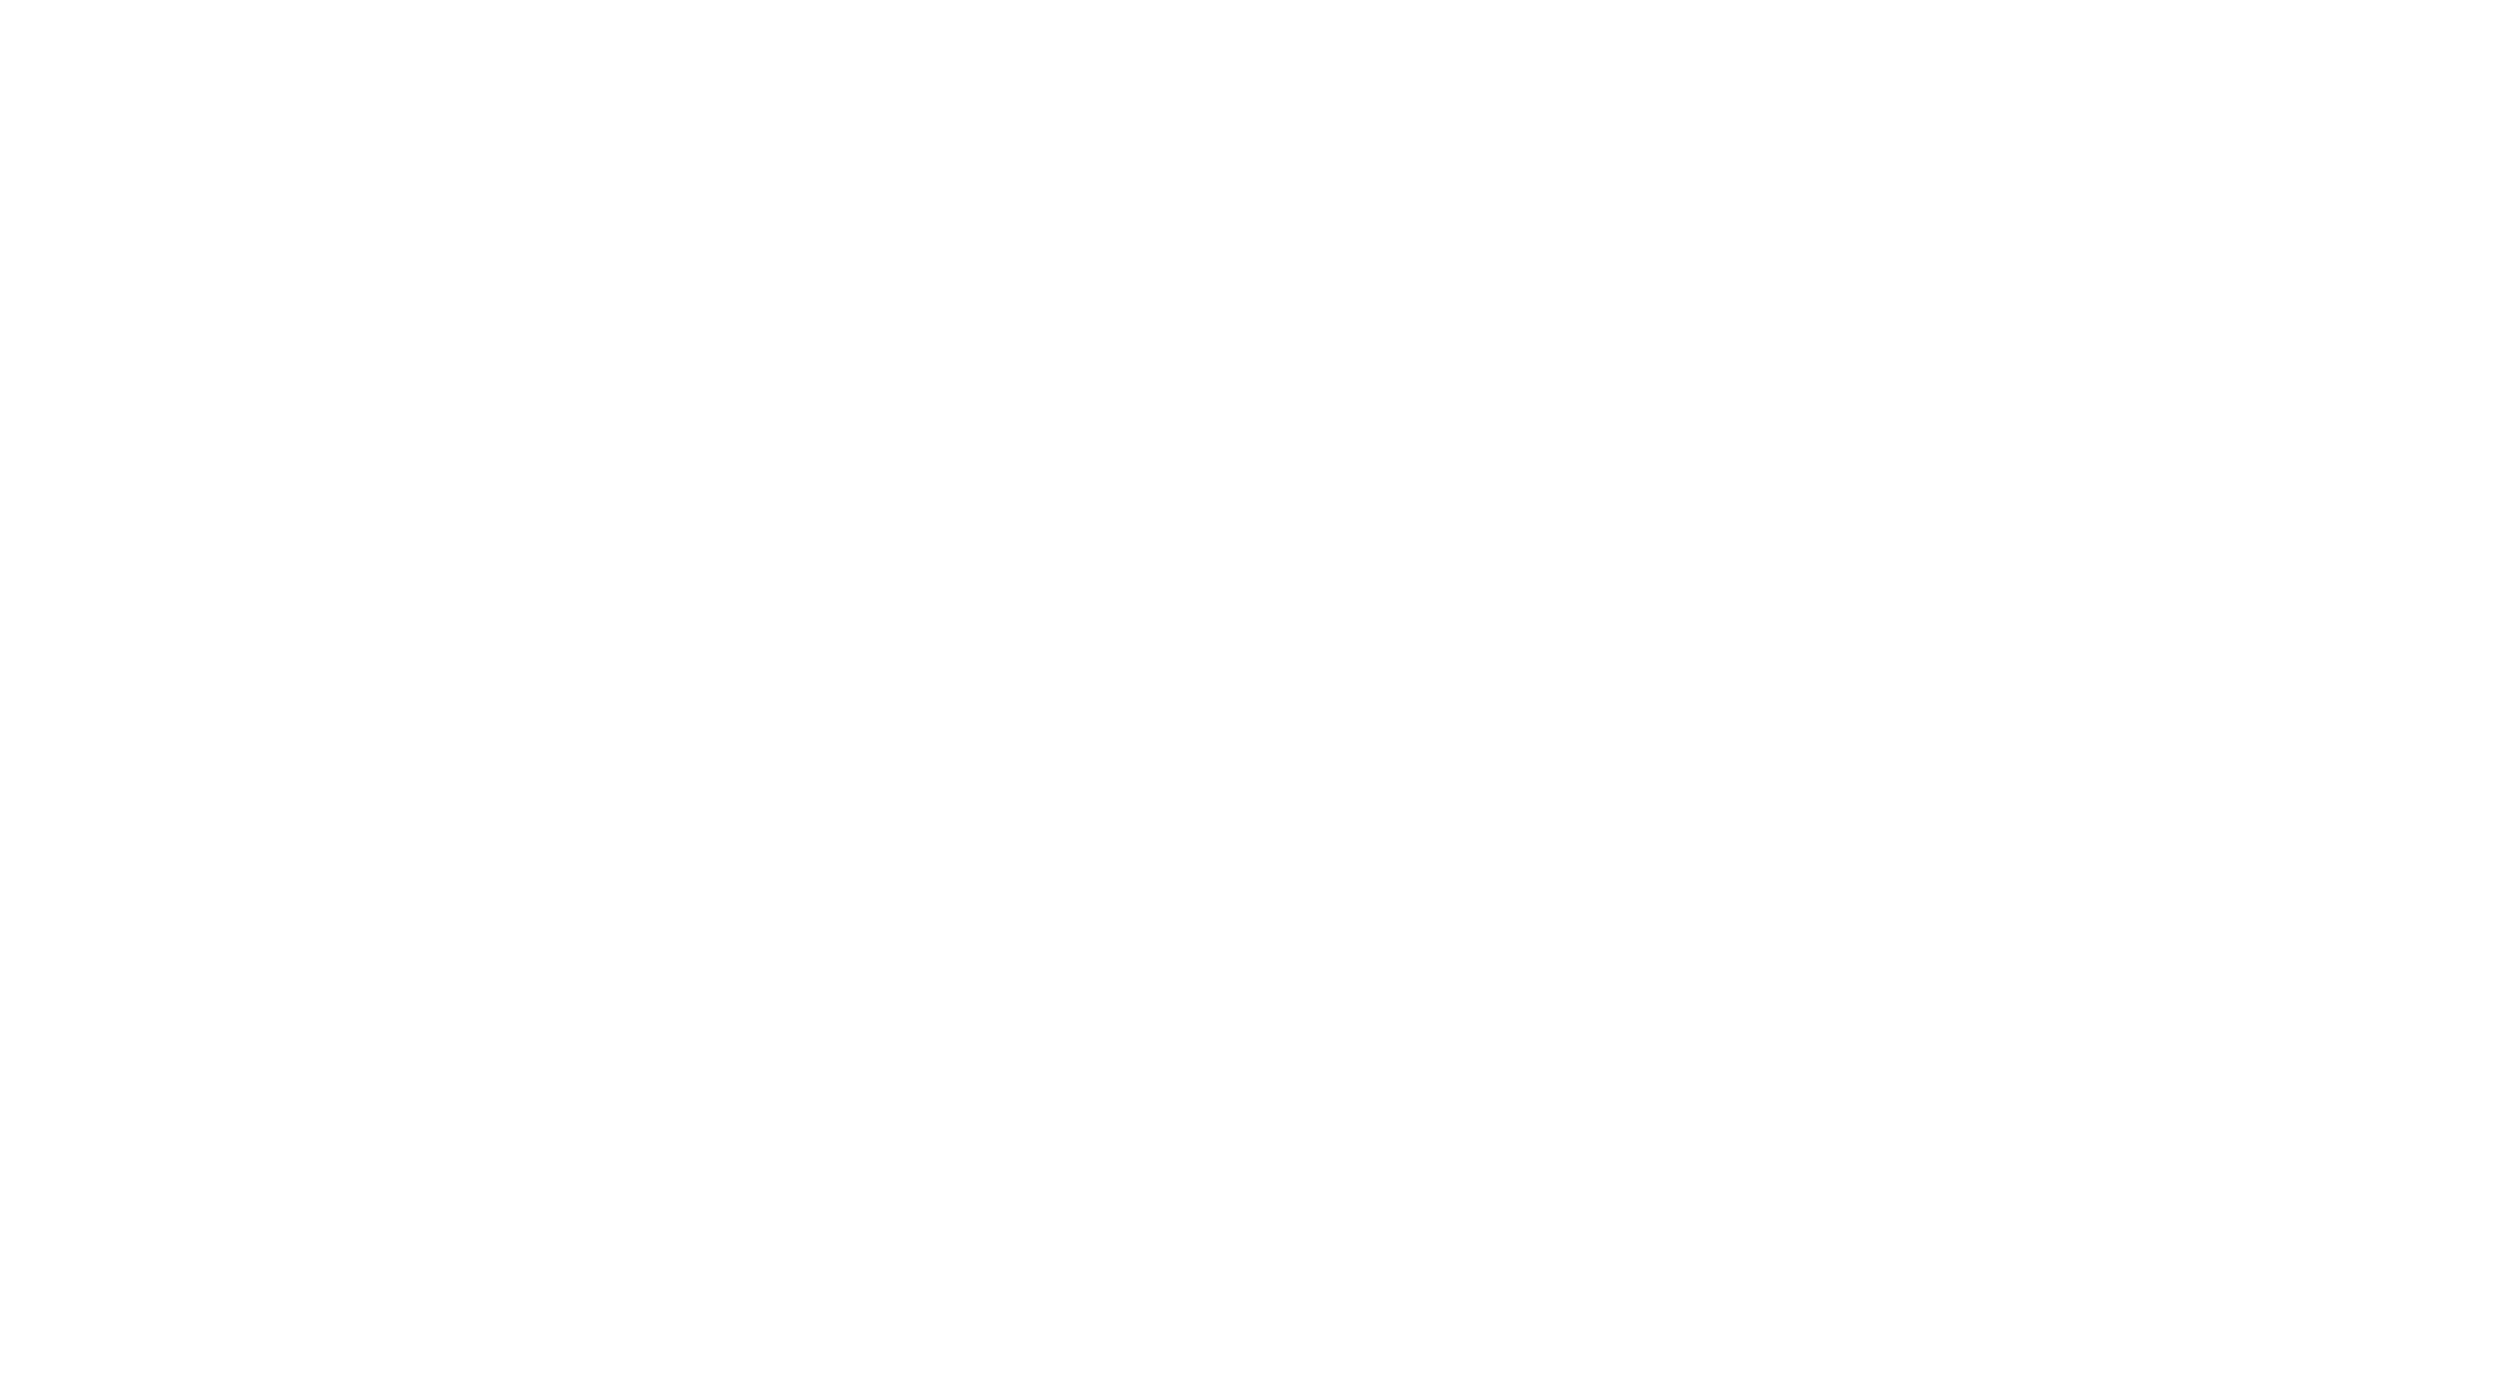 Eleven 17 Photography